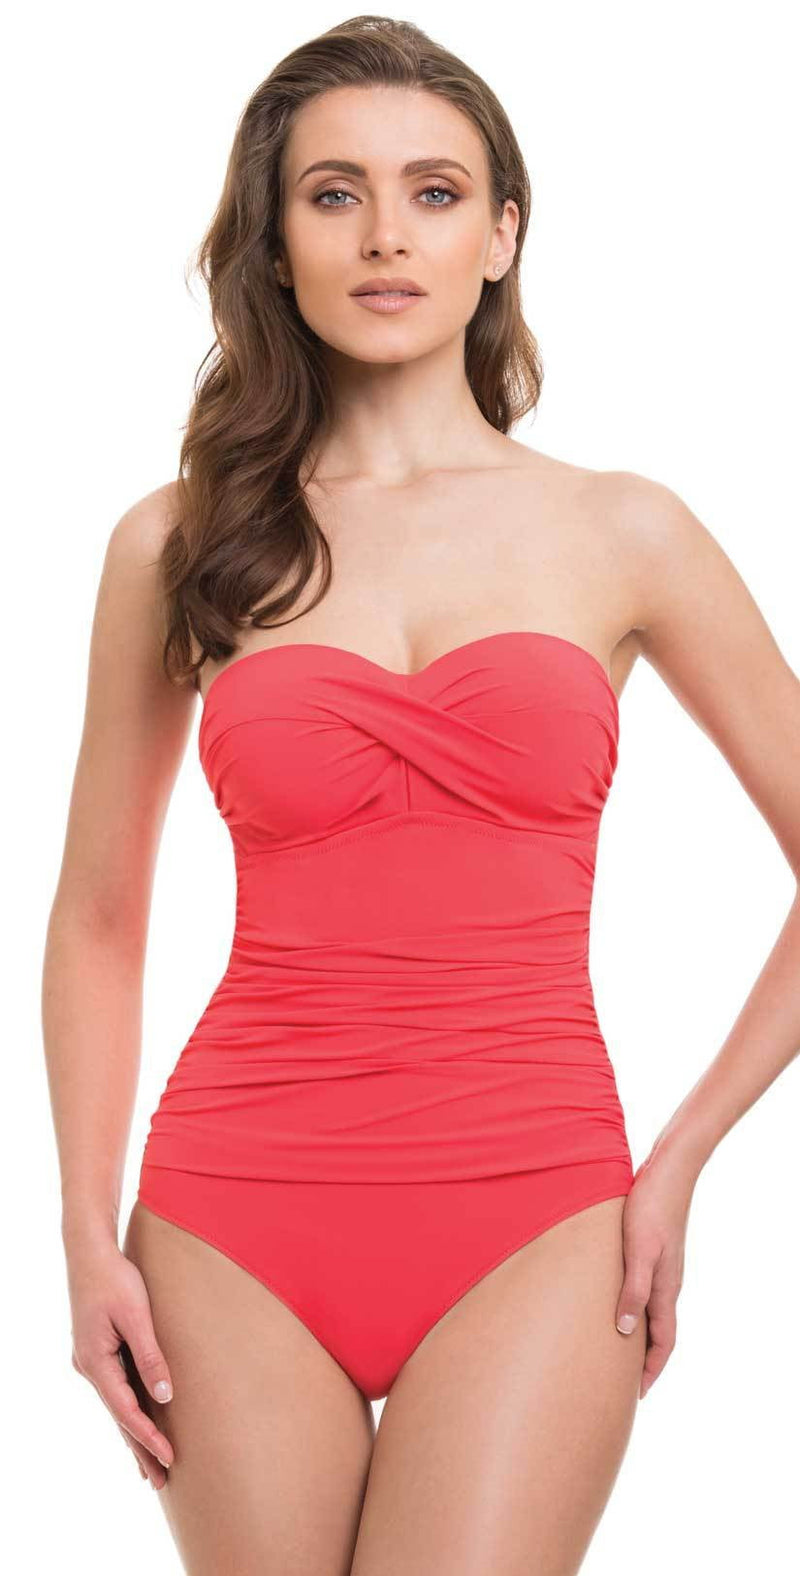 Profile By Gottex Cross Bandeau One Piece in Coral E837-2D04-611: